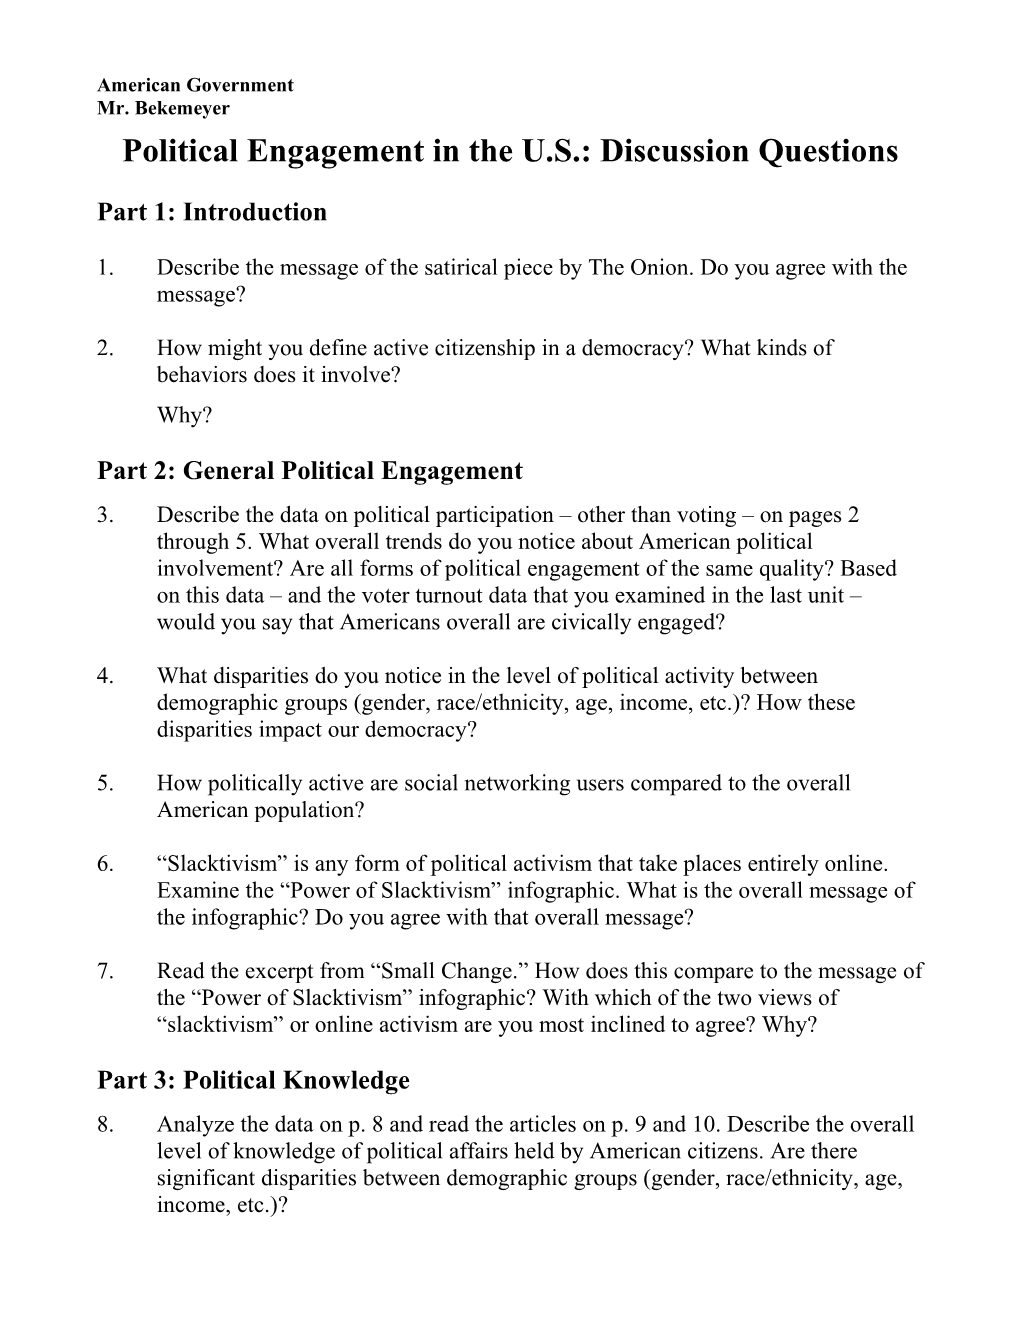 Political Engagement in the U.S.: Discussion Questions